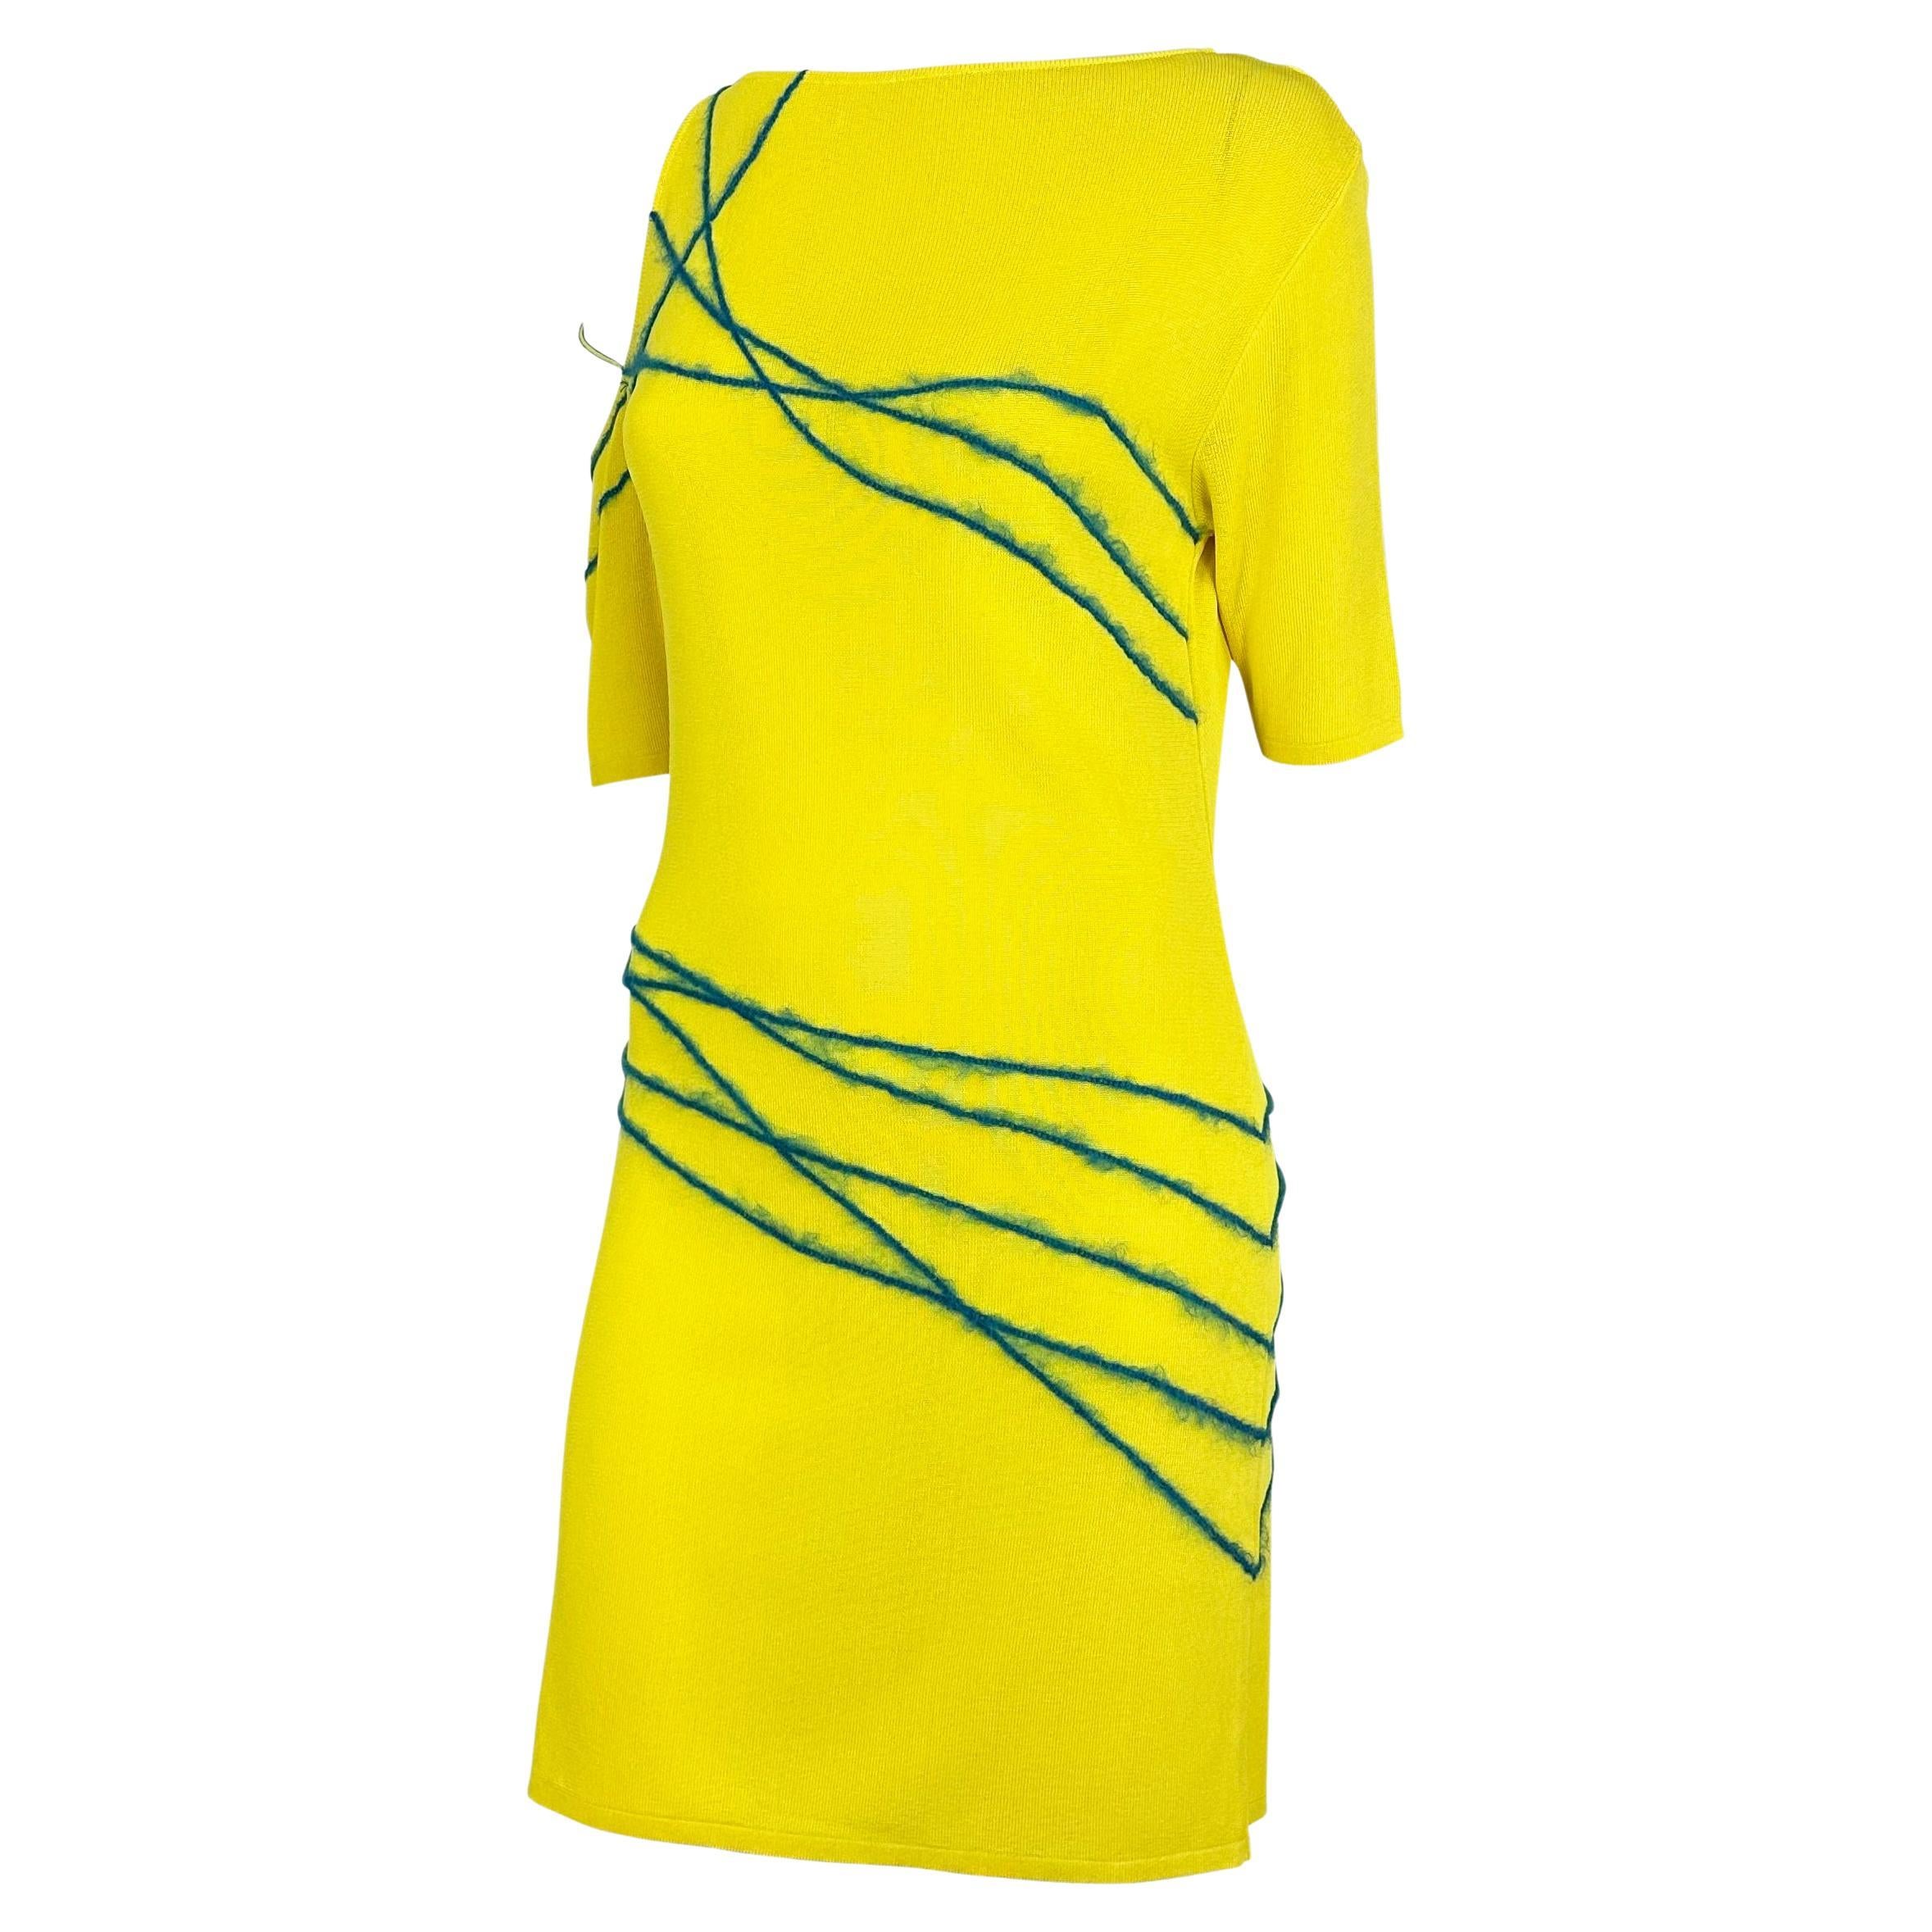 Presenting a fabulous yellow knit Gianni Versace dress, designed by Donatella Versace. From the Spring/Summer 1998 collection, similar knit dresses debuted on the season's runway. This vibrant yellow dress features an exposed shoulder, half-length